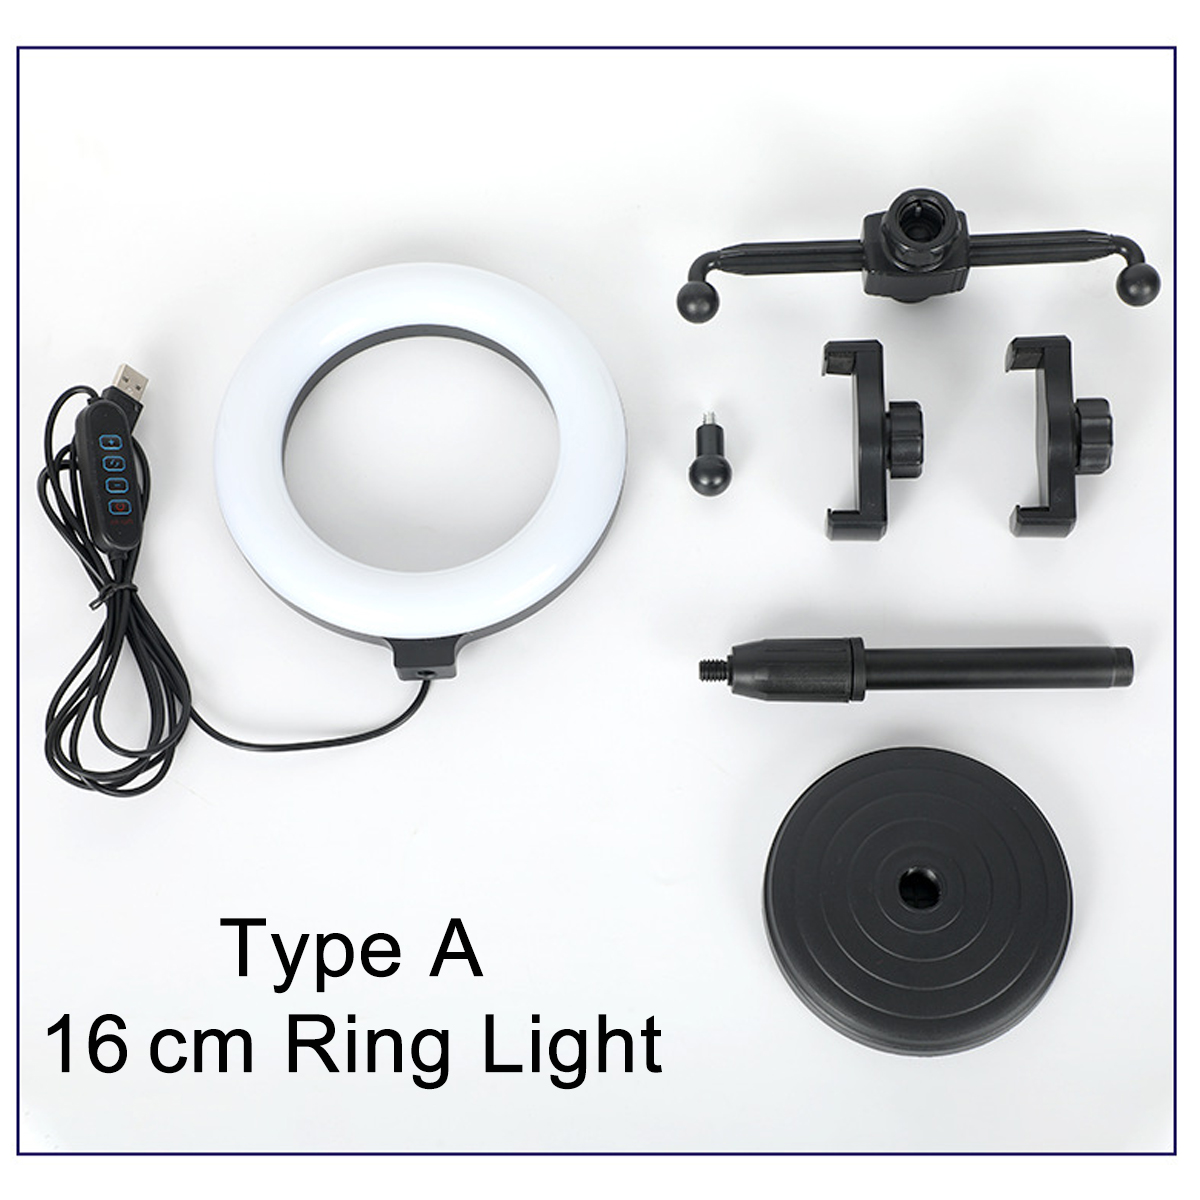 916-cm-3-Modes-of-Color-Temperature-Color-Ring-Fill-Light-with-Dual-Mobile-Phone-Holder-YouTube-Tikt-1881126-12